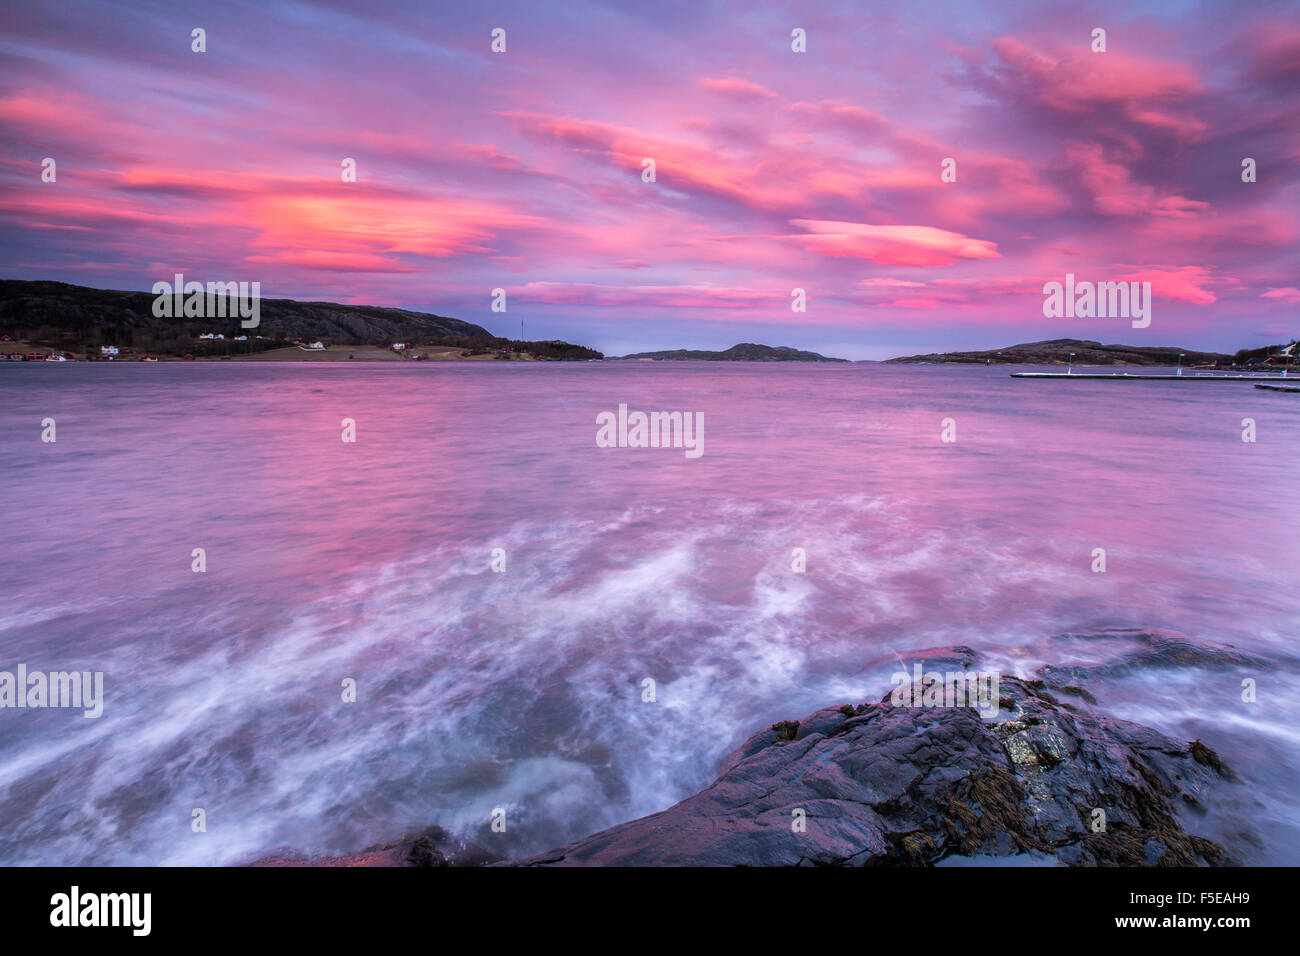 Pink sky at sunrise reflected in the cold waters, Flatanger, Trondelag, Norway, Scandinavia, Europe Stock Photo